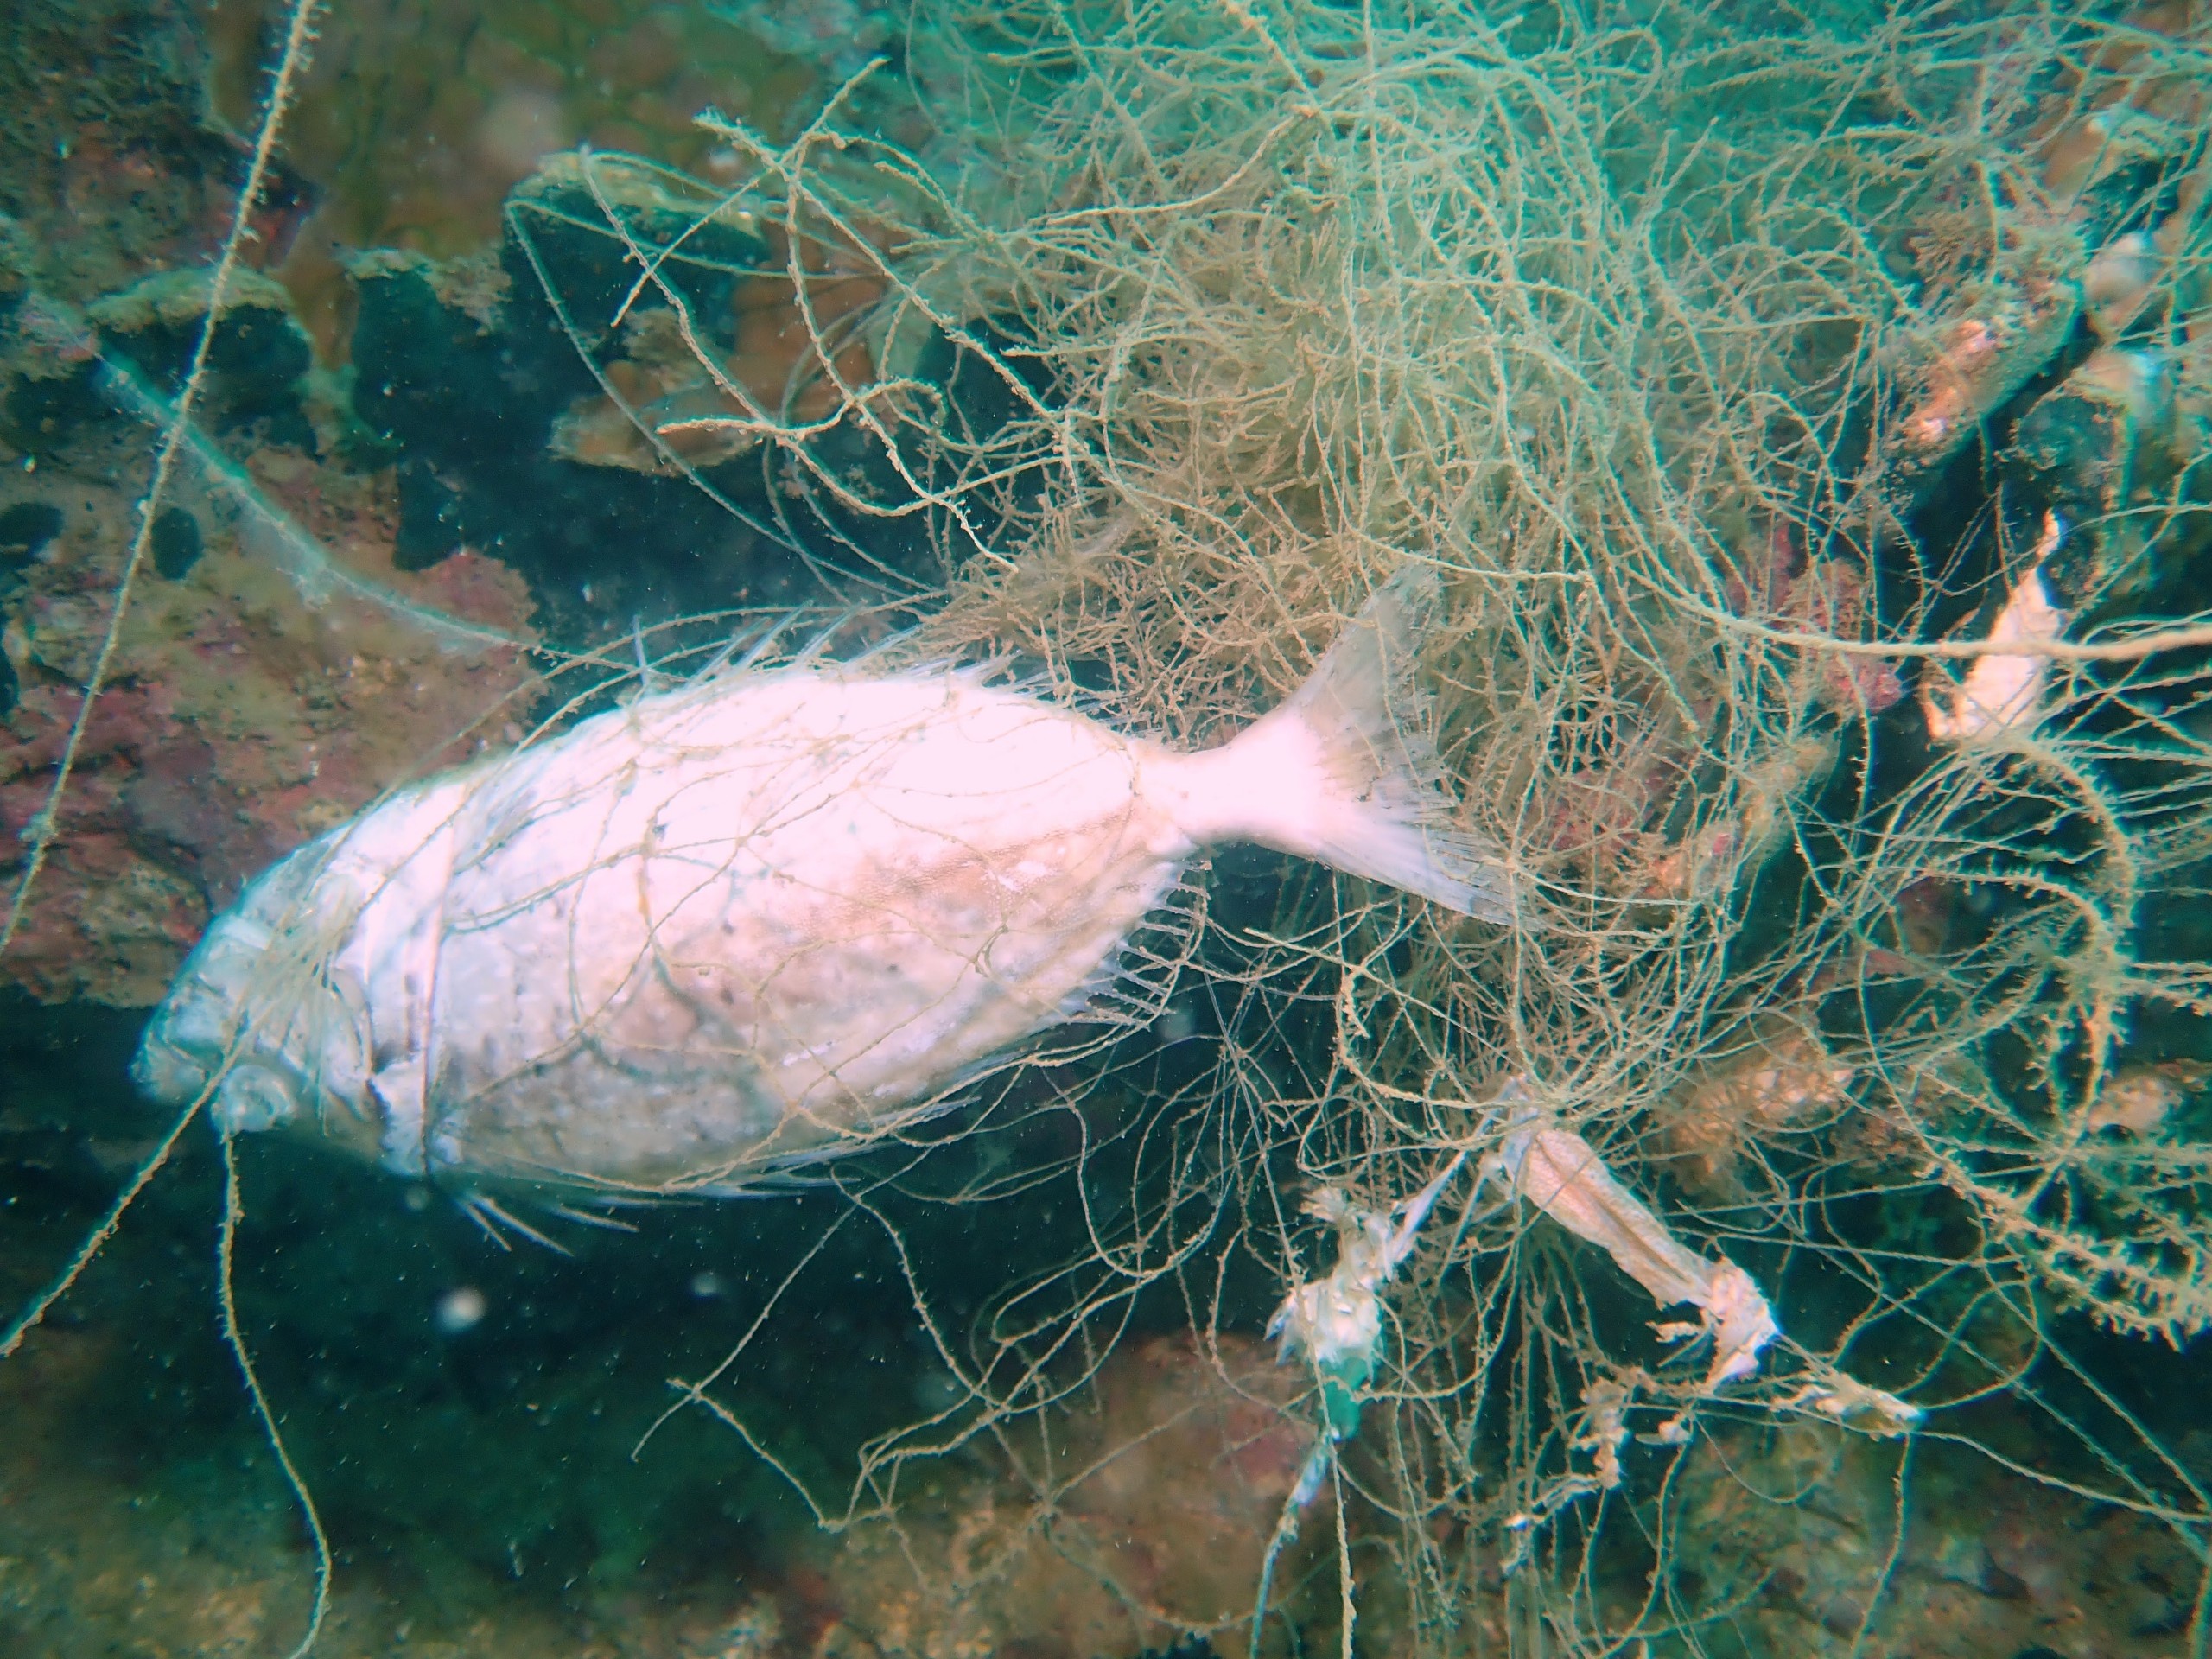 A dead fish is stuck in a fishing net at the Hon Mun Nature Reserve in Nha Trang City, Khanh Hoa Province, Vietnam. Photo: Van Duc /Handout via Tuoi Tre